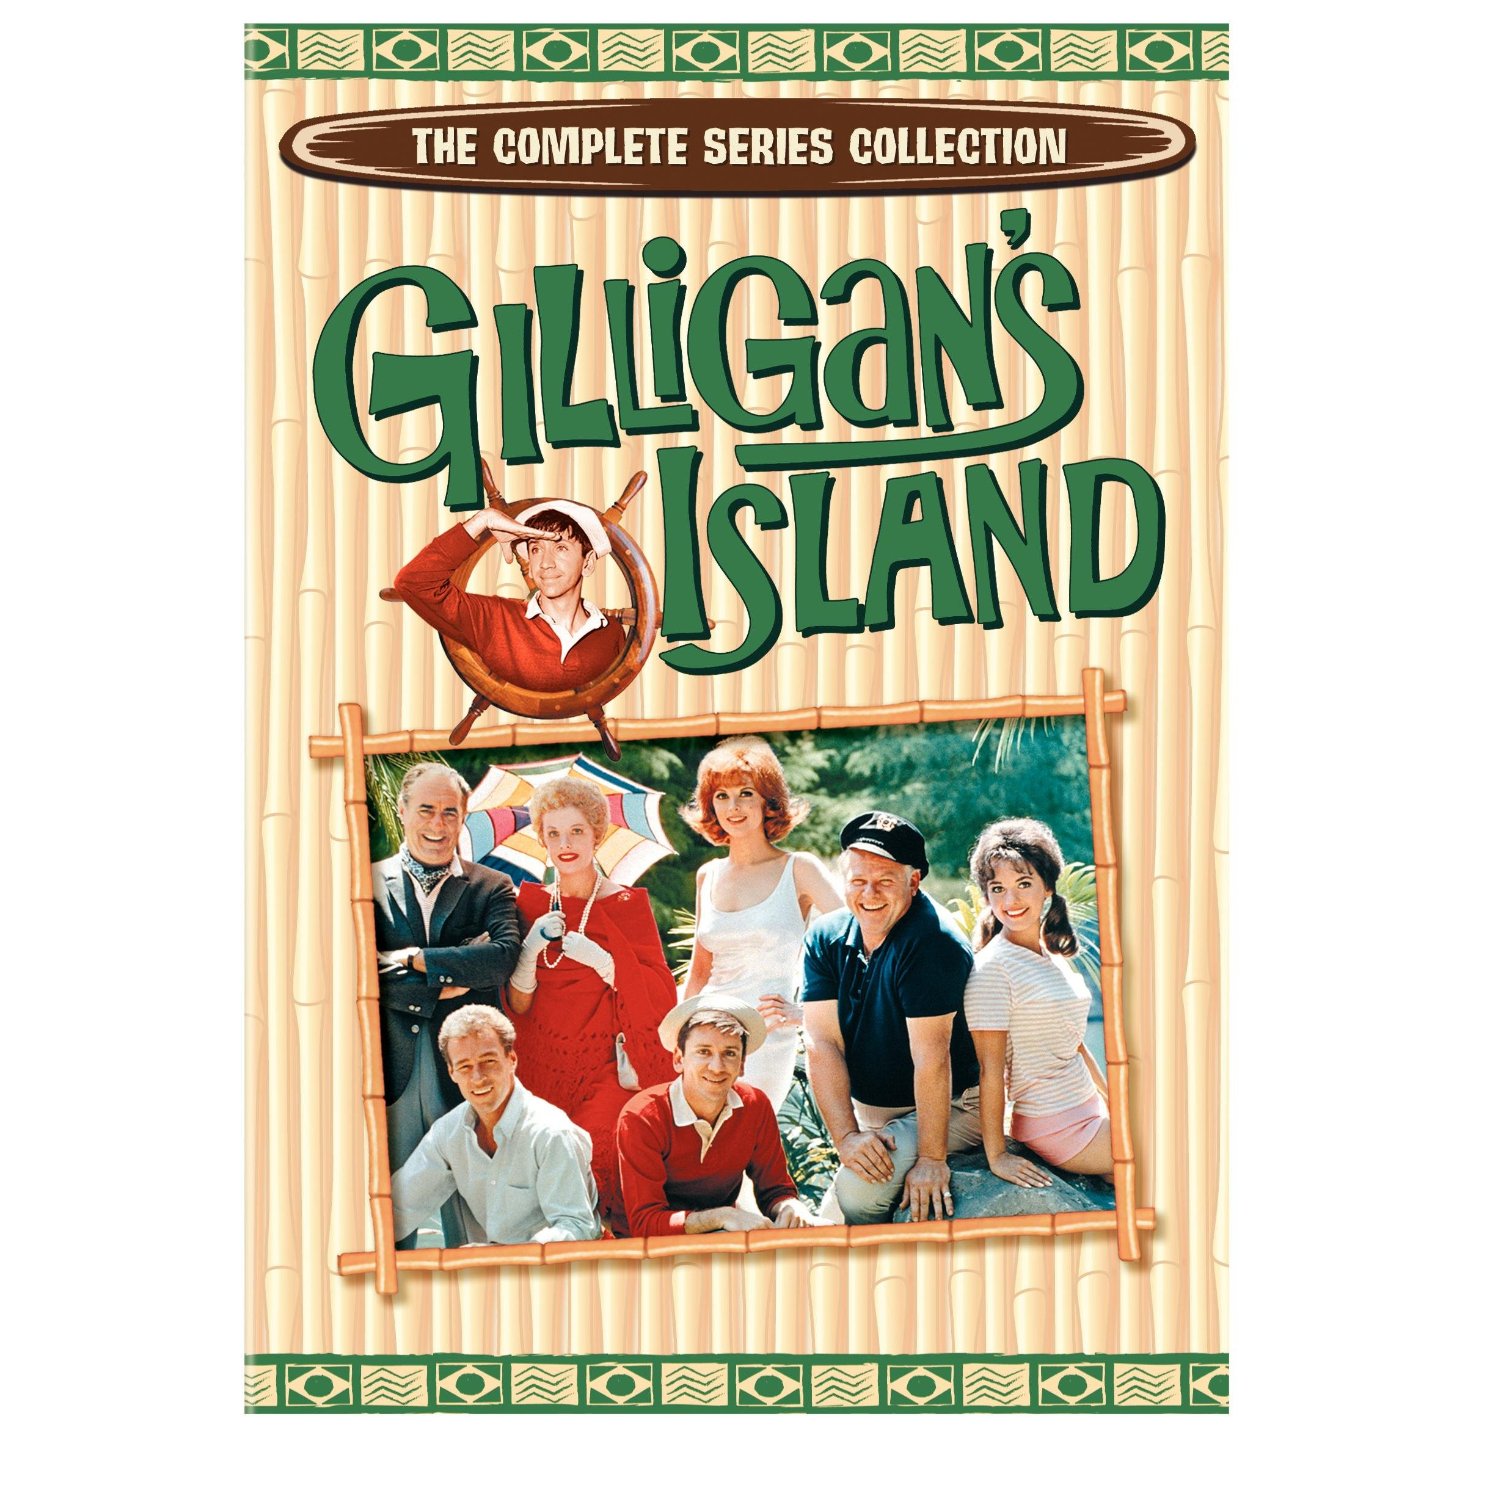 Gilligan’s Island: Complete Series Collection for just $45.49 (Reg. $114.82) – Amazon!